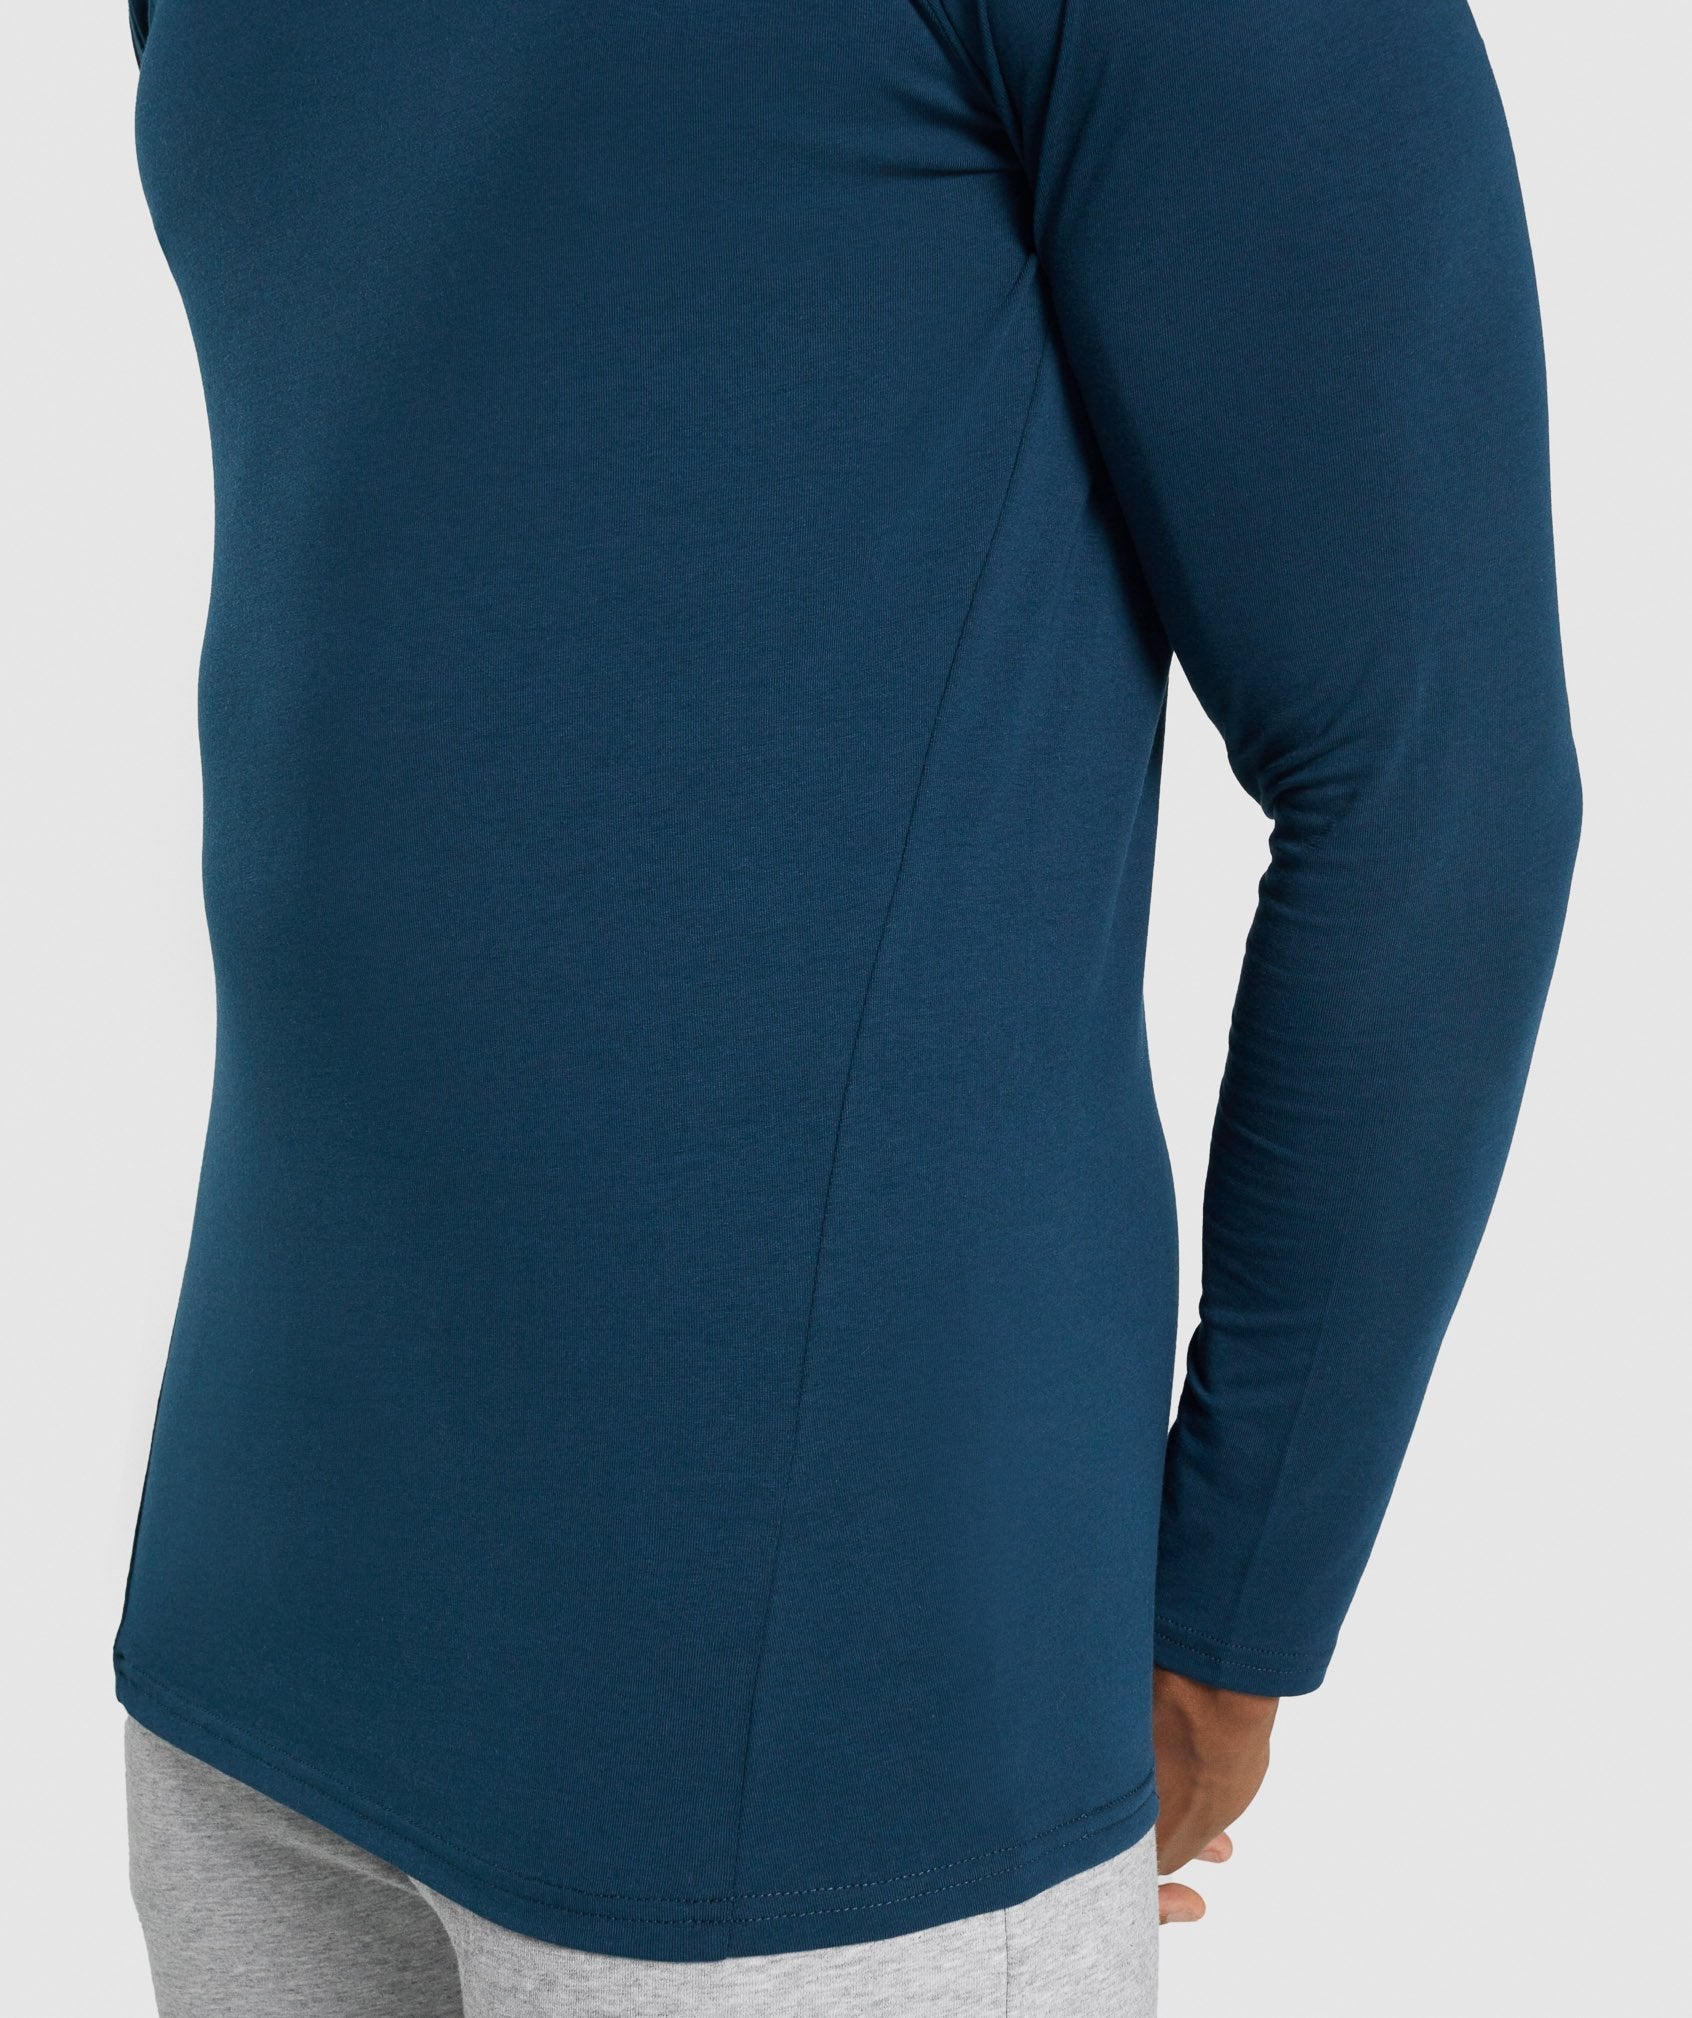 Critical 2.0 Long Sleeve T-Shirt in Navy - view 7